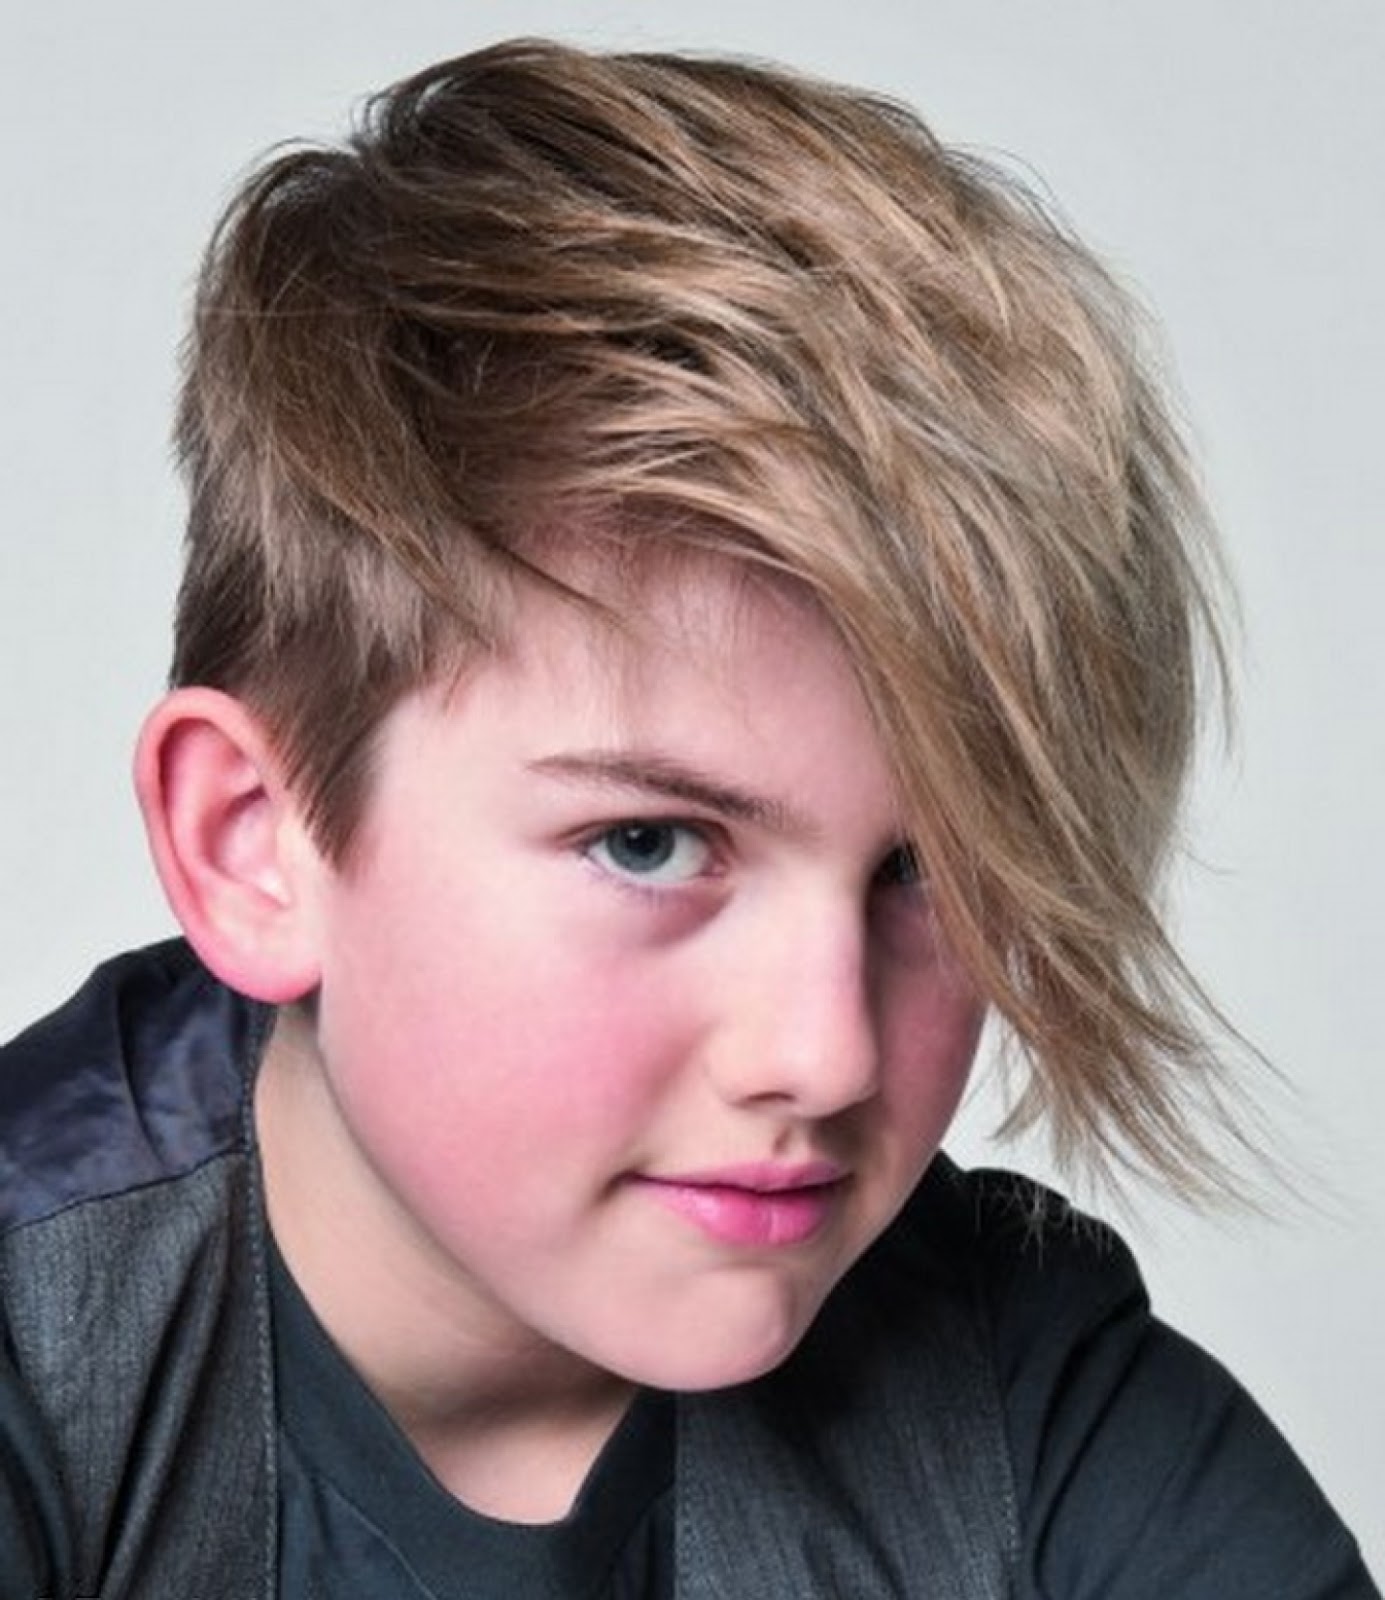 Boys Haircuts: 14 Cool Hairstyles for Boys with Short or ...